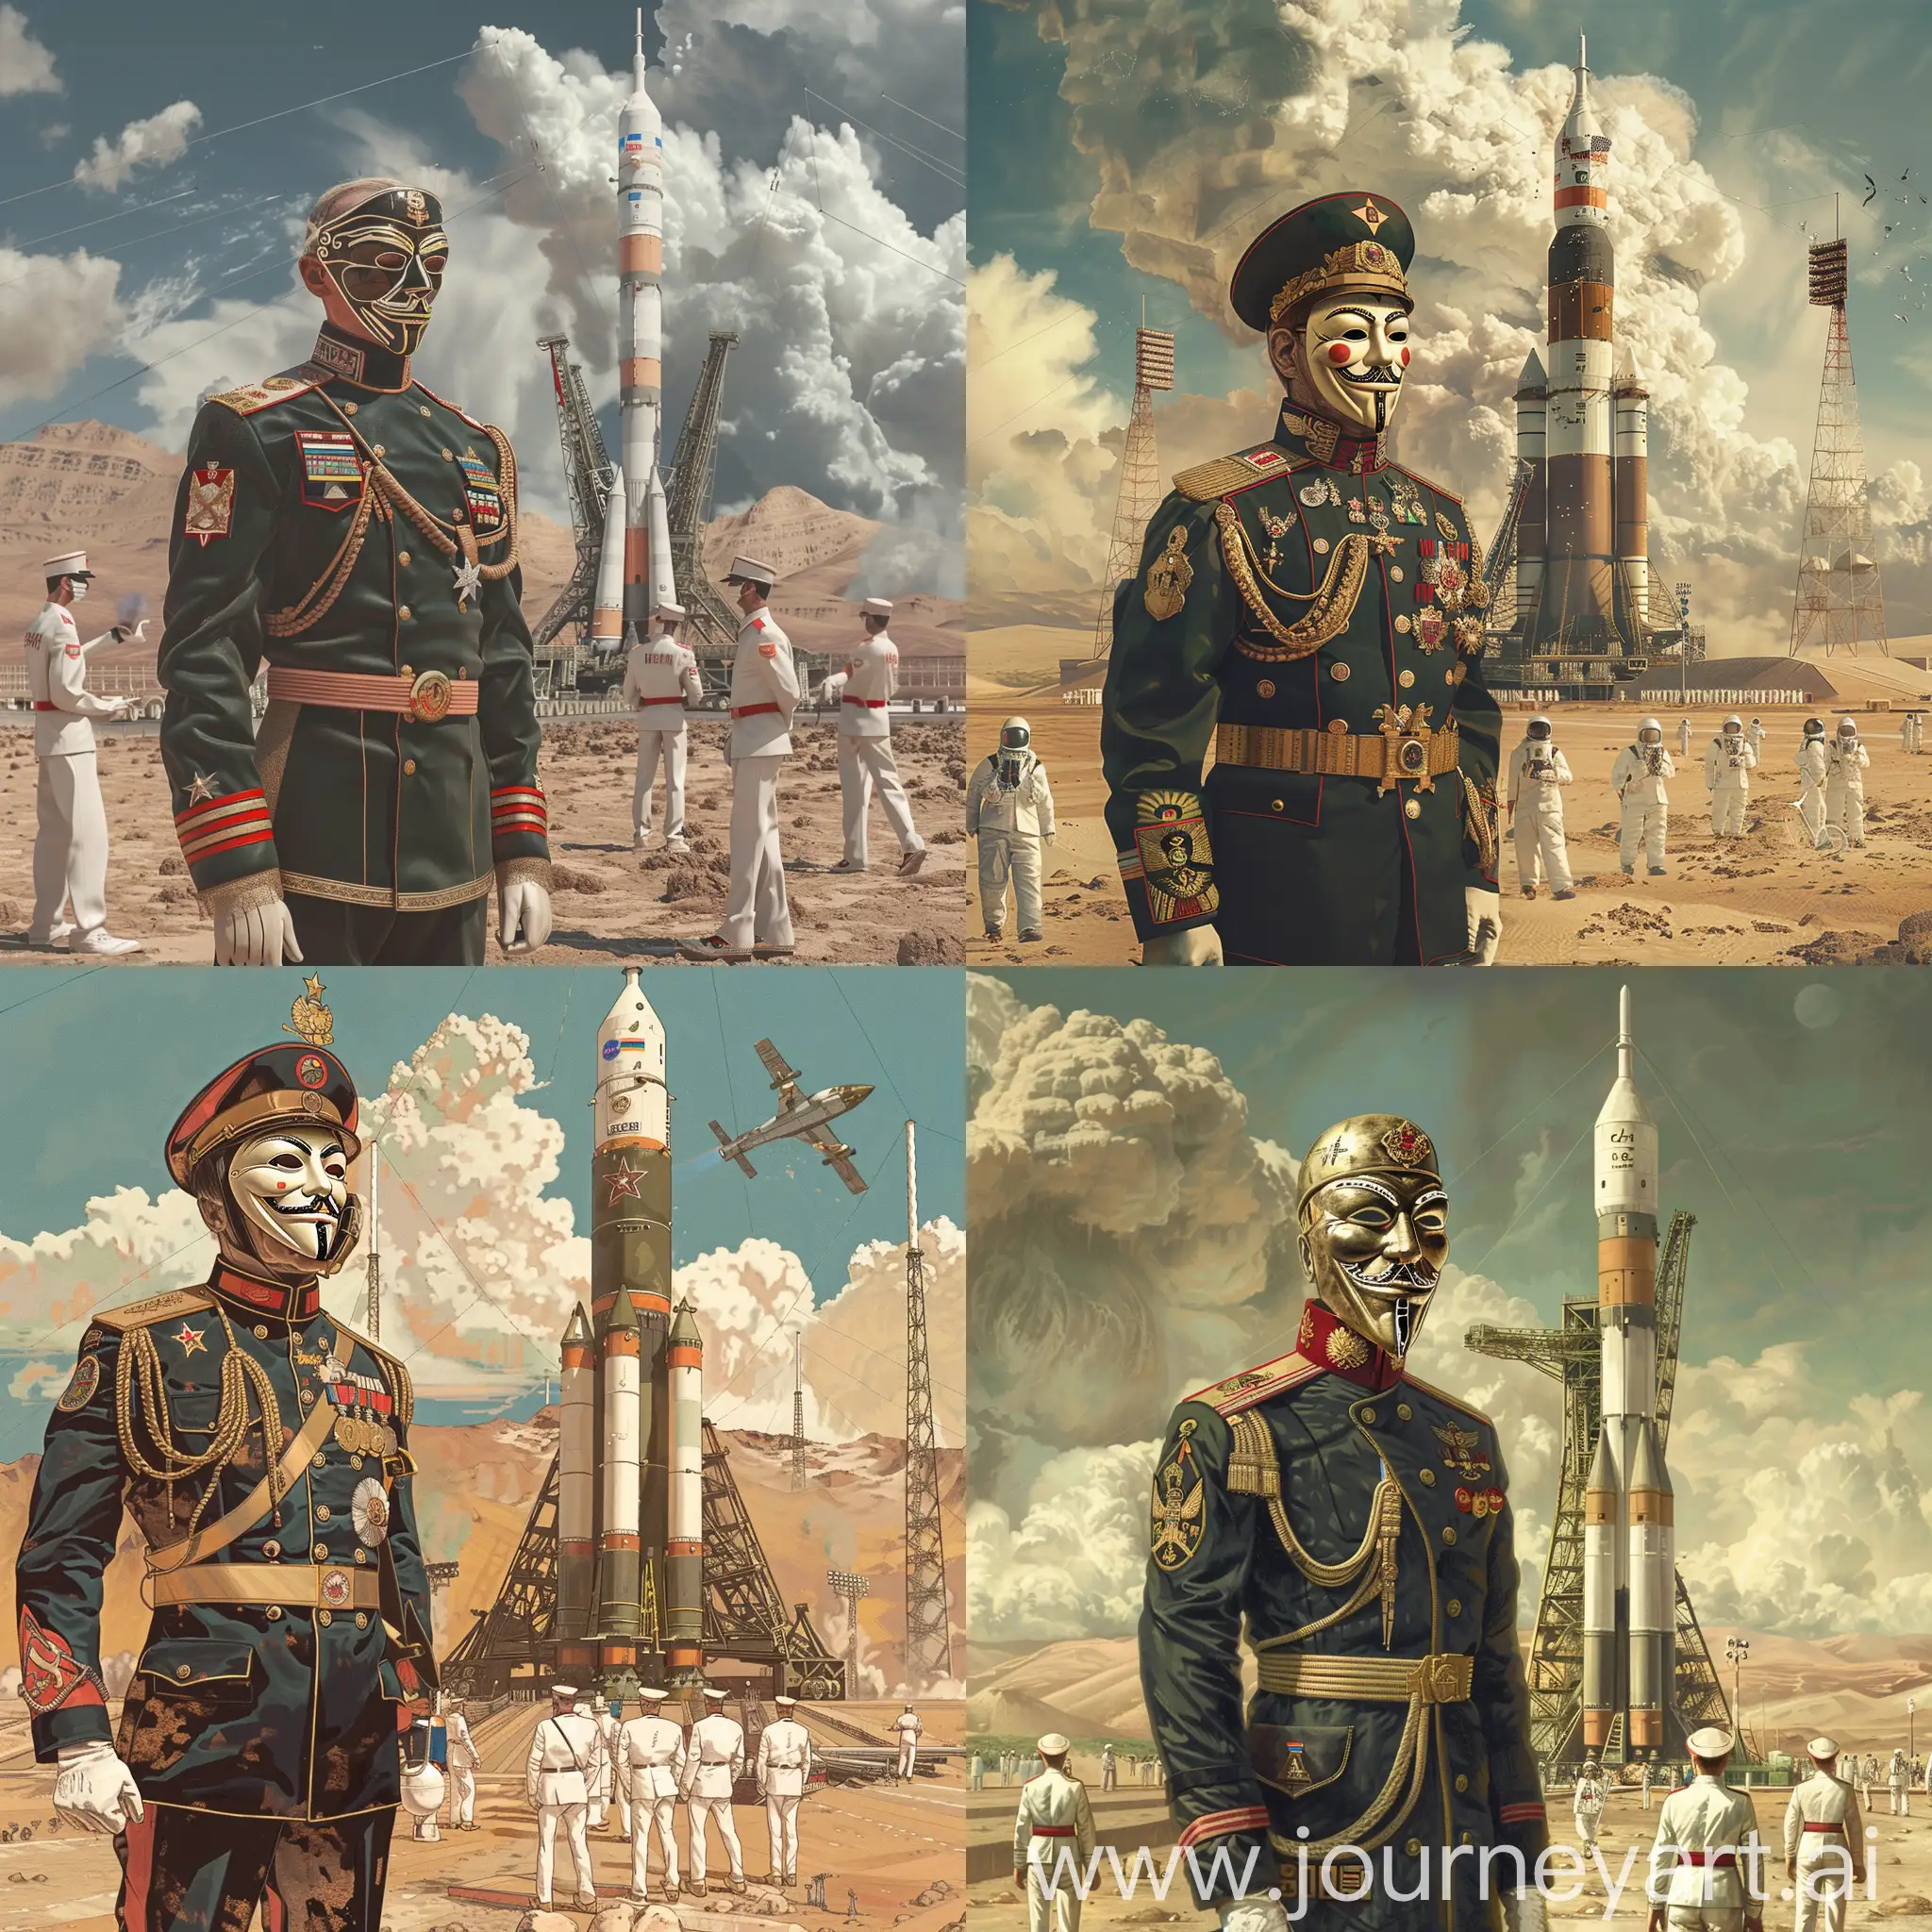 A Soviet general in full dress uniform and an Anonymous mask stands proudly against the backdrop of a soaring Soviet space rocket. There is a desert in the background, and employees of the cosmodrome in white uniforms are bustling around.